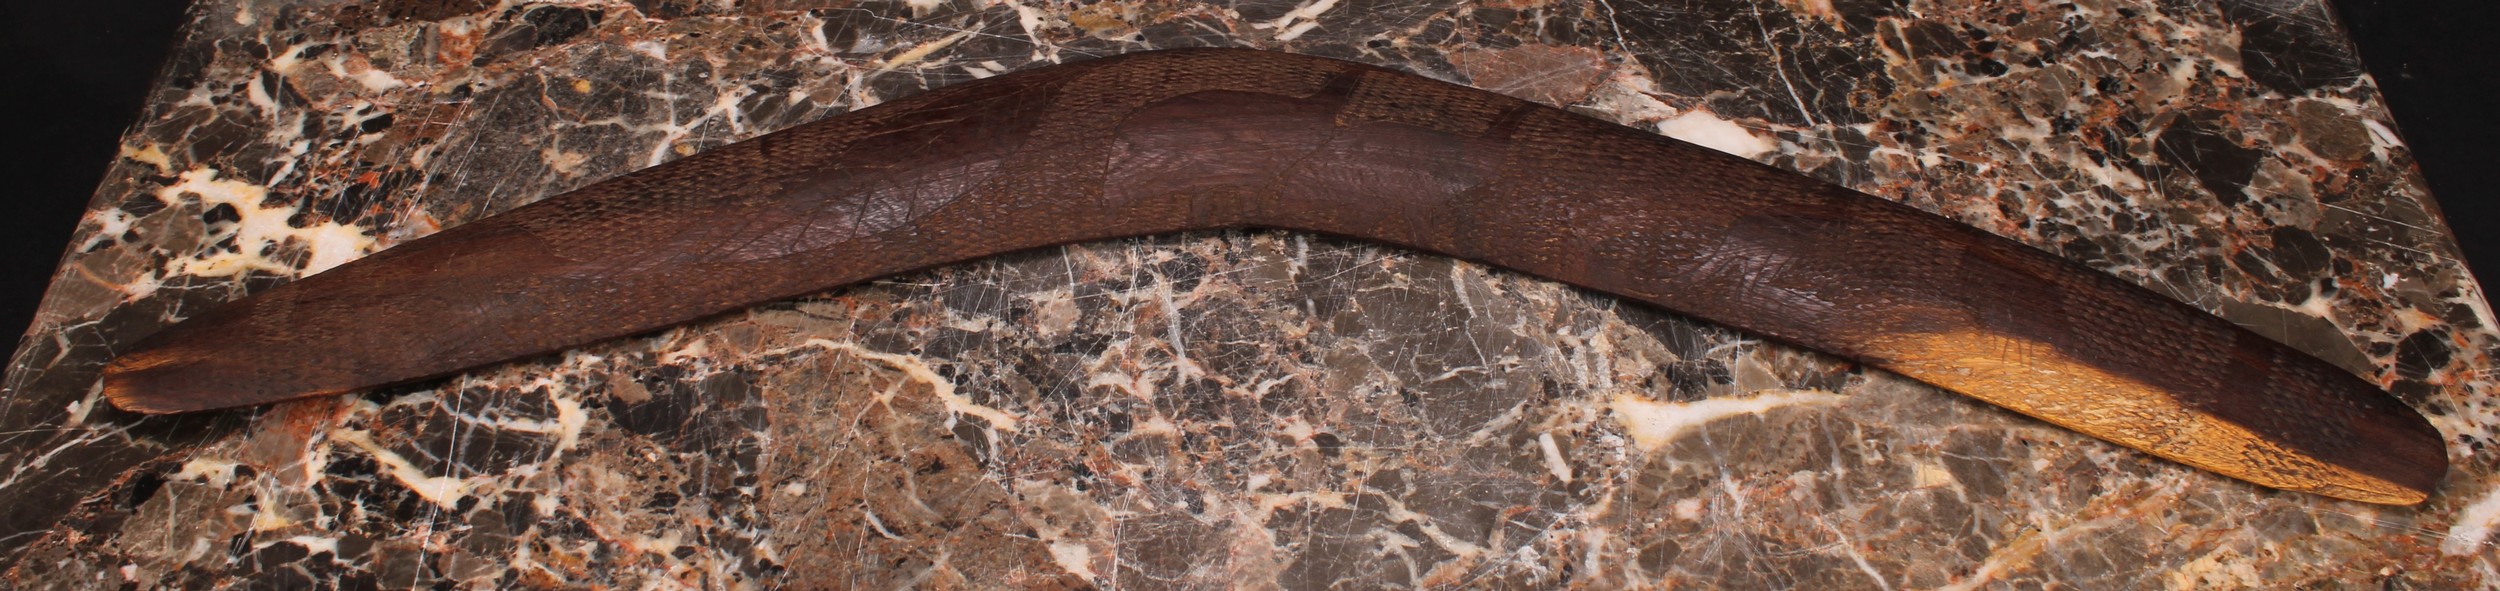 Australian Aboriginal Boomerang with geometric marks and depictions of Emu's, Leaves and - Image 2 of 3